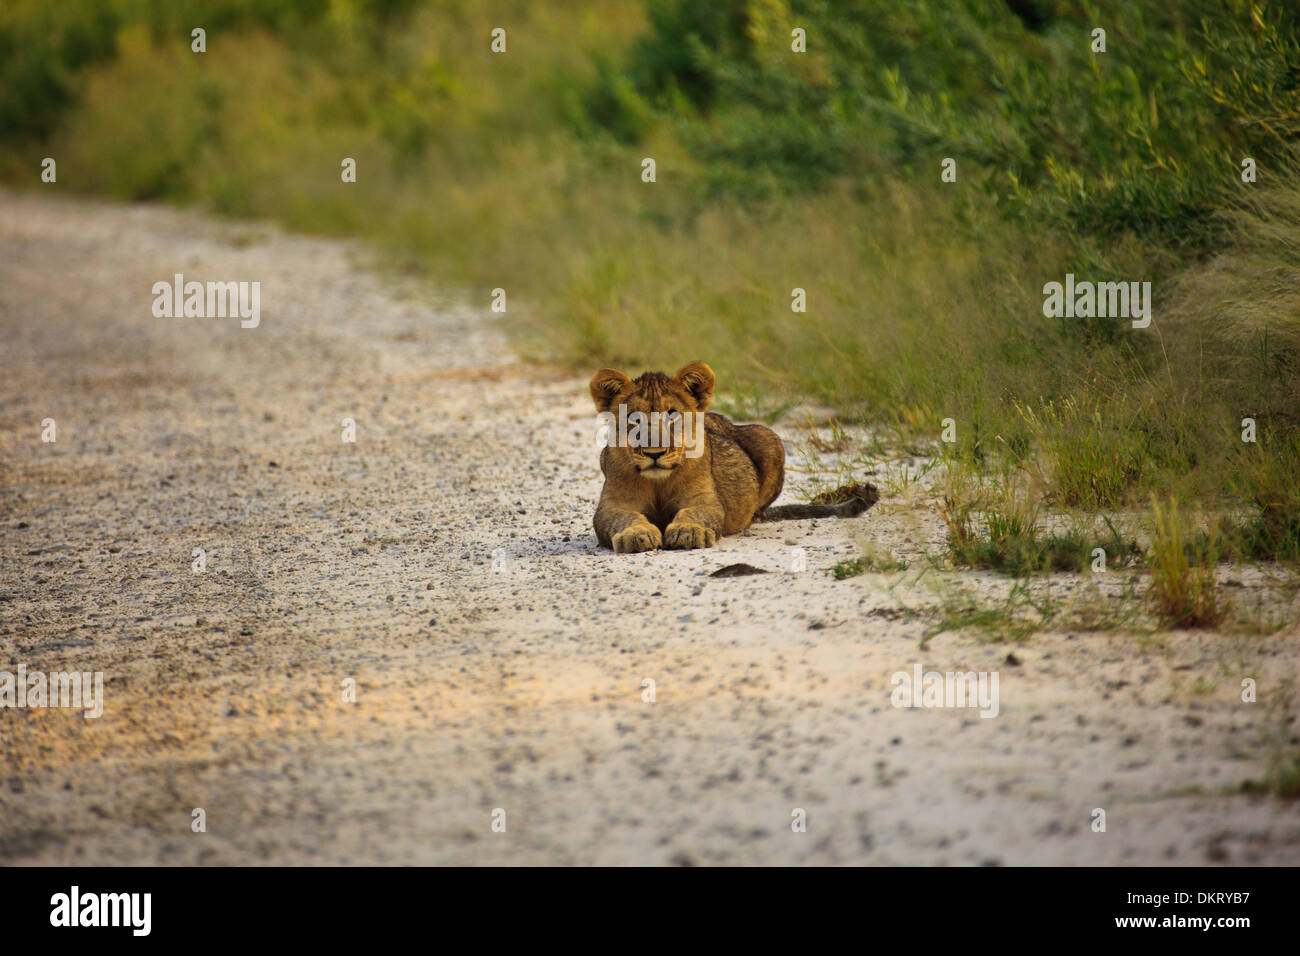 Young lion cub laying on road facing photographer in Etosha National Park, Namibia Africa Stock Photo